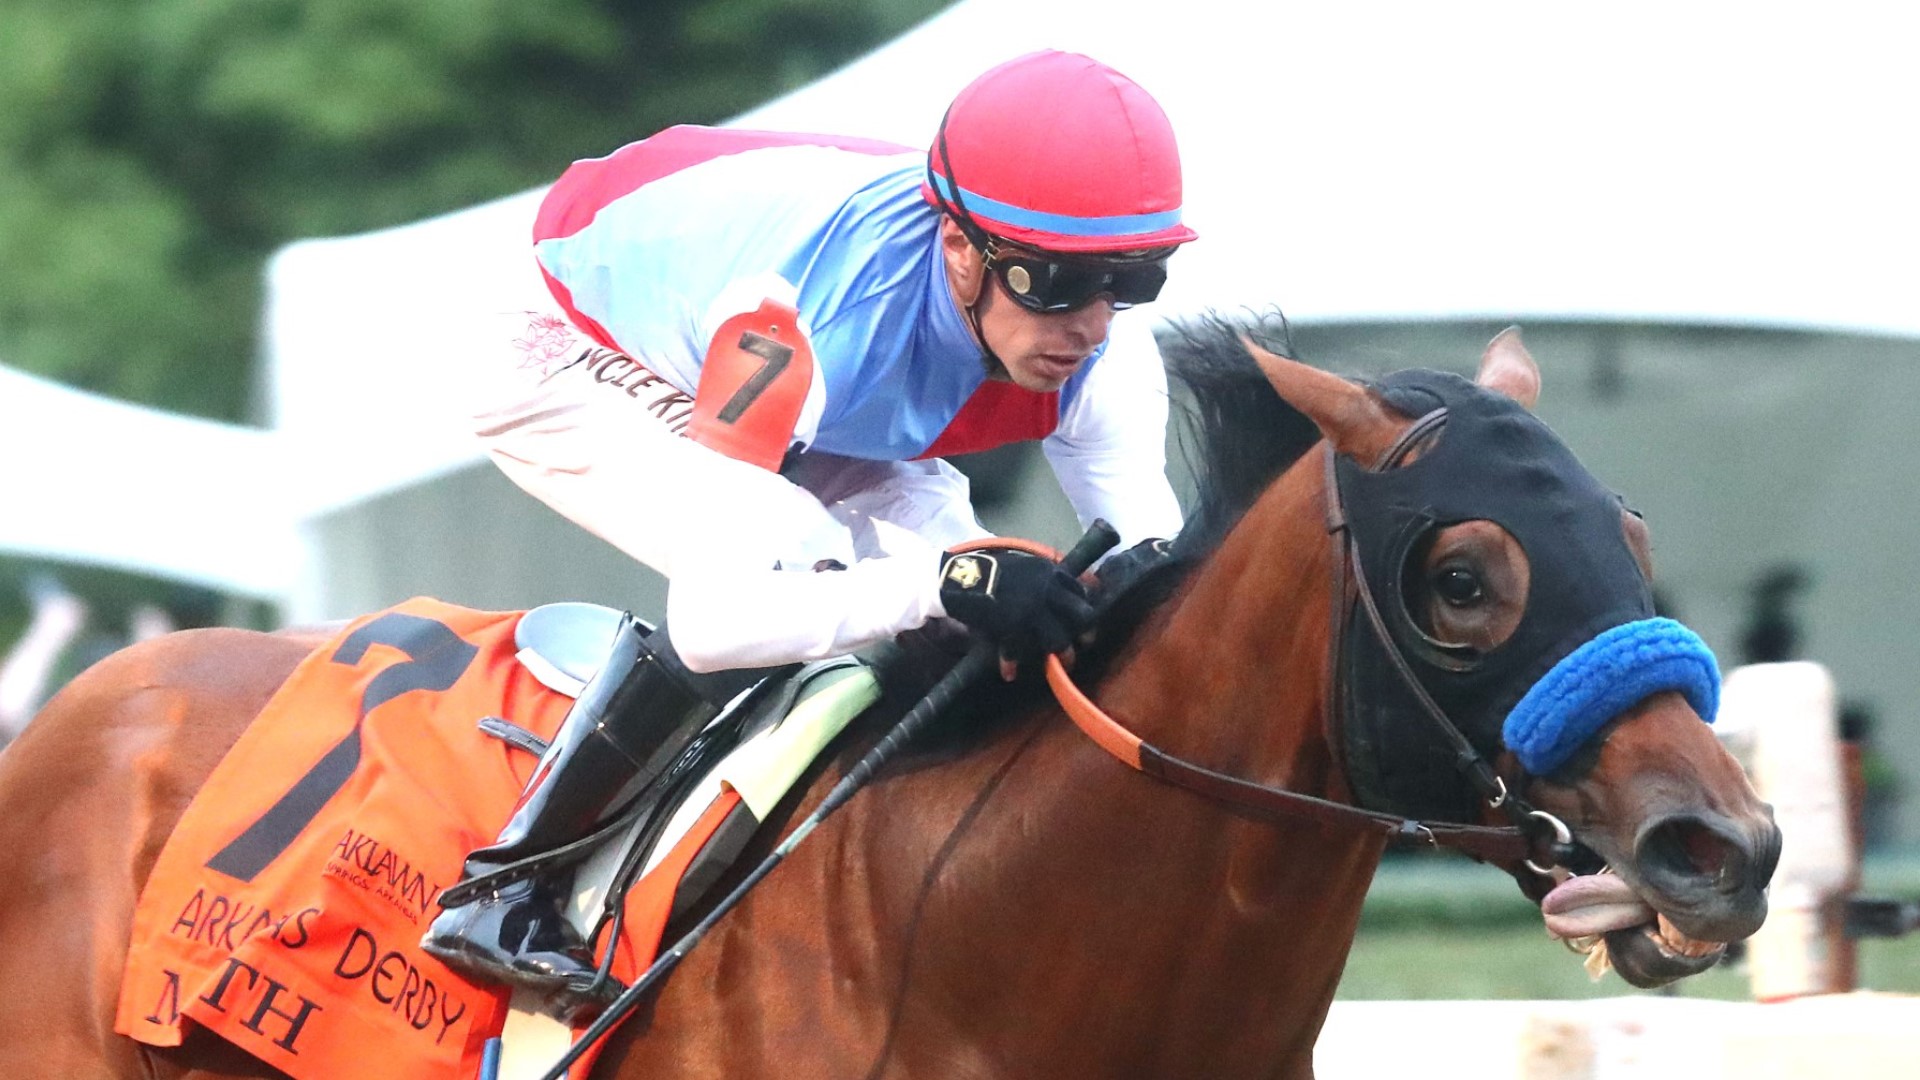 Muth's victory at the Arkansas Derby was a record fifth for Hall of Fame trainer Bob Baffert, but the horse won't be eligible to race at the Kentucky Derby.